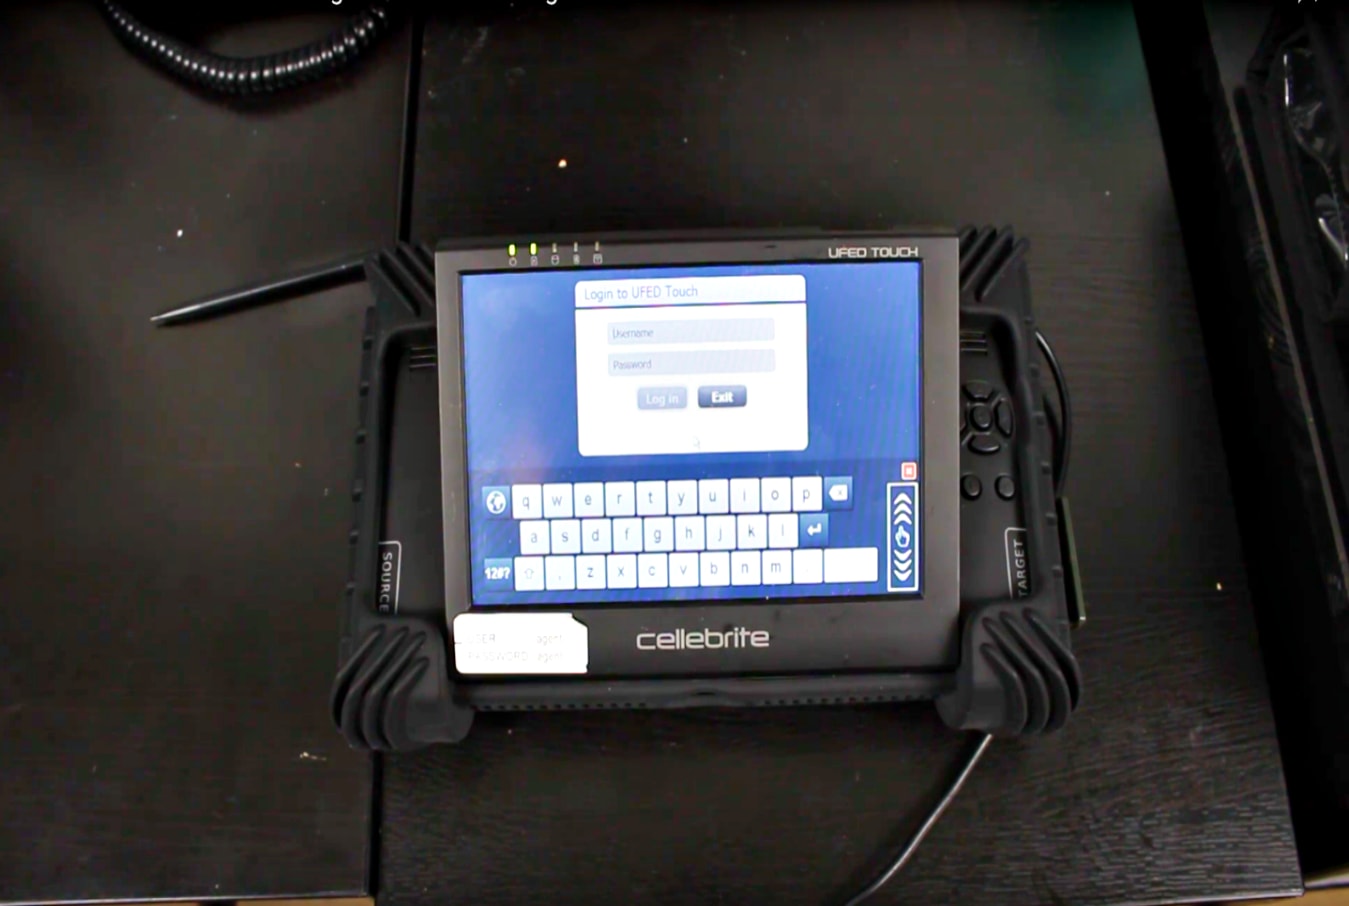 iPhone hacking tool Cellebrite being sold on eBay